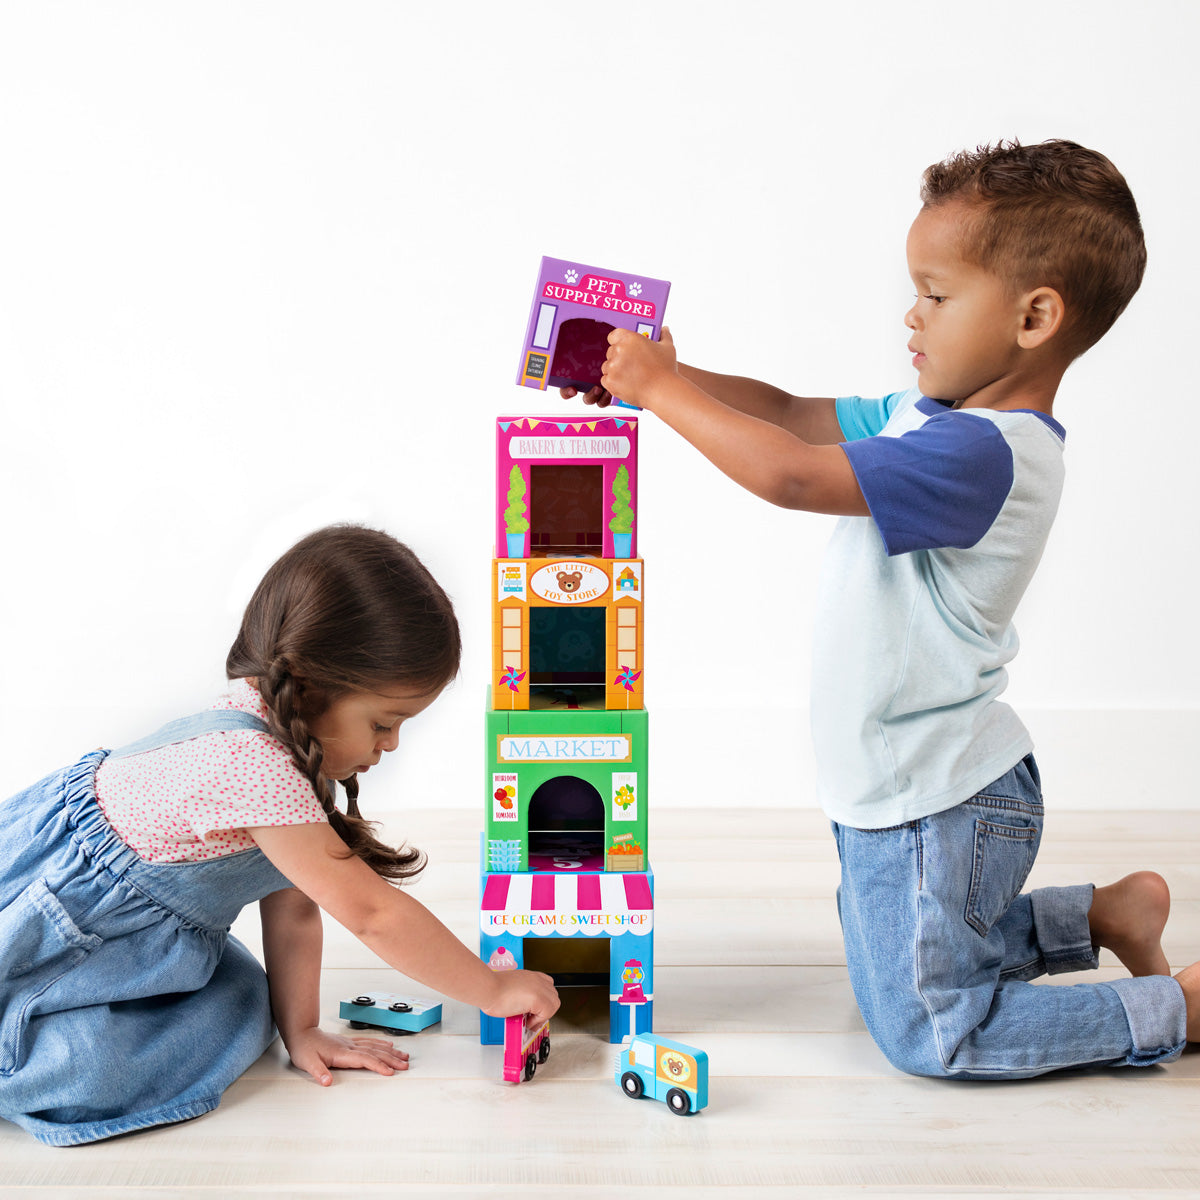 Stackables Nested Cardboard Toys And Cars Set - Rainbow Town